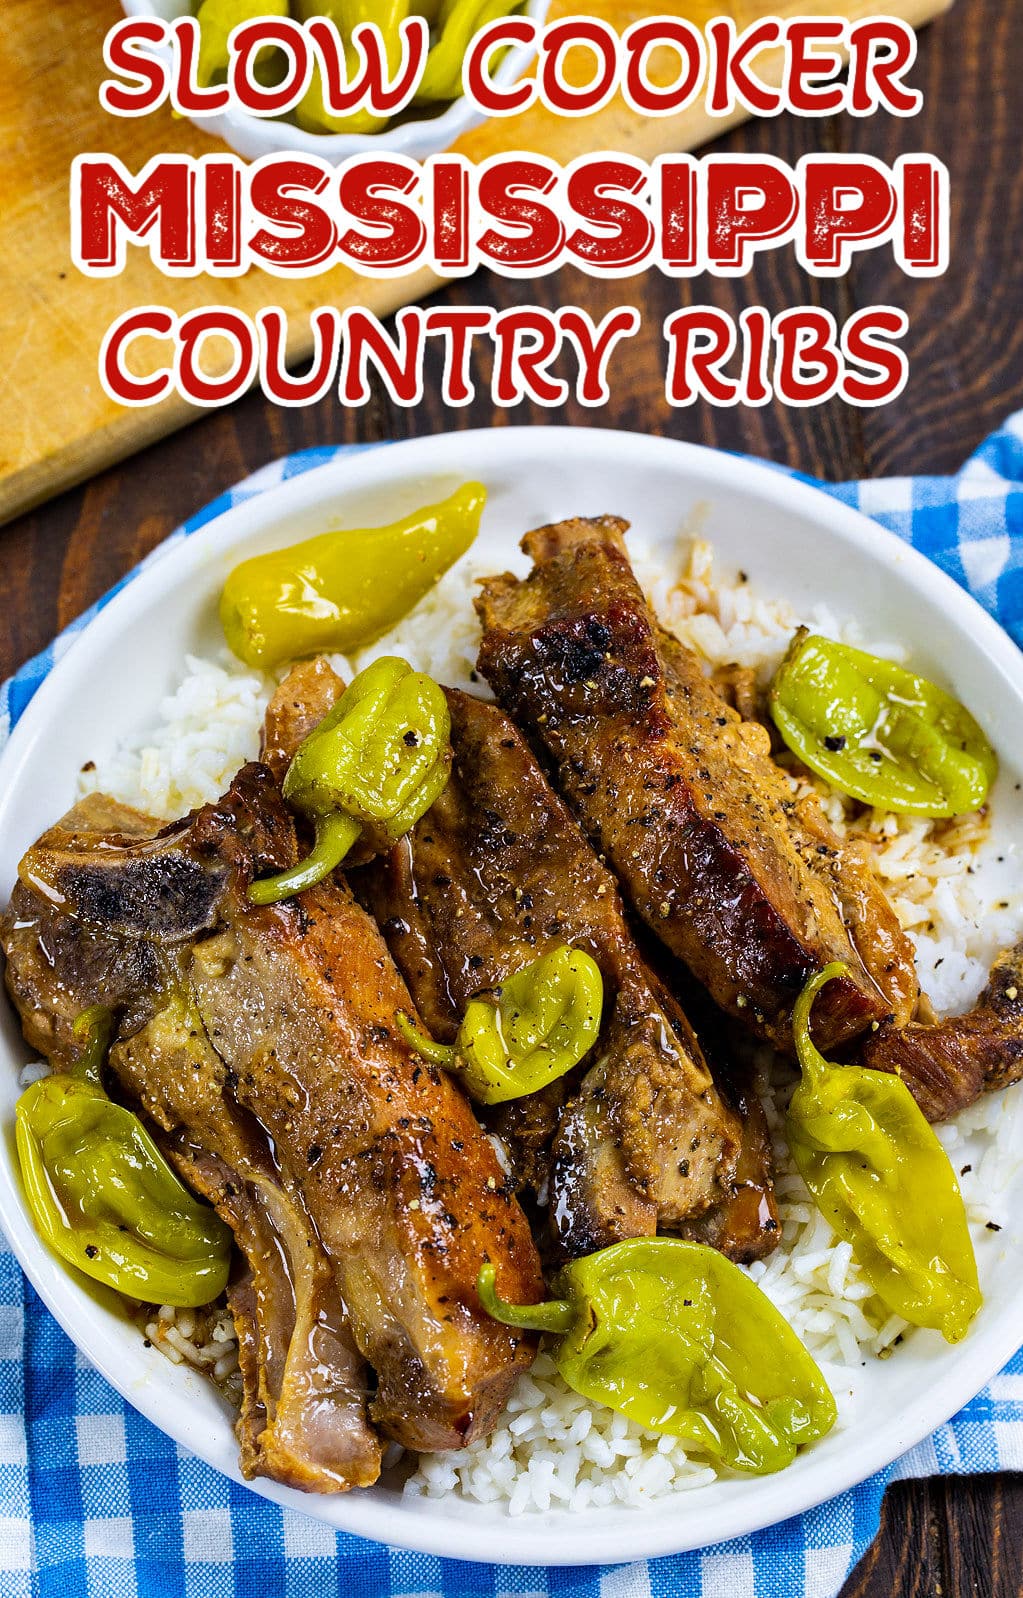 Slow Cooker Mississippi Country Ribs over rice on a plate.